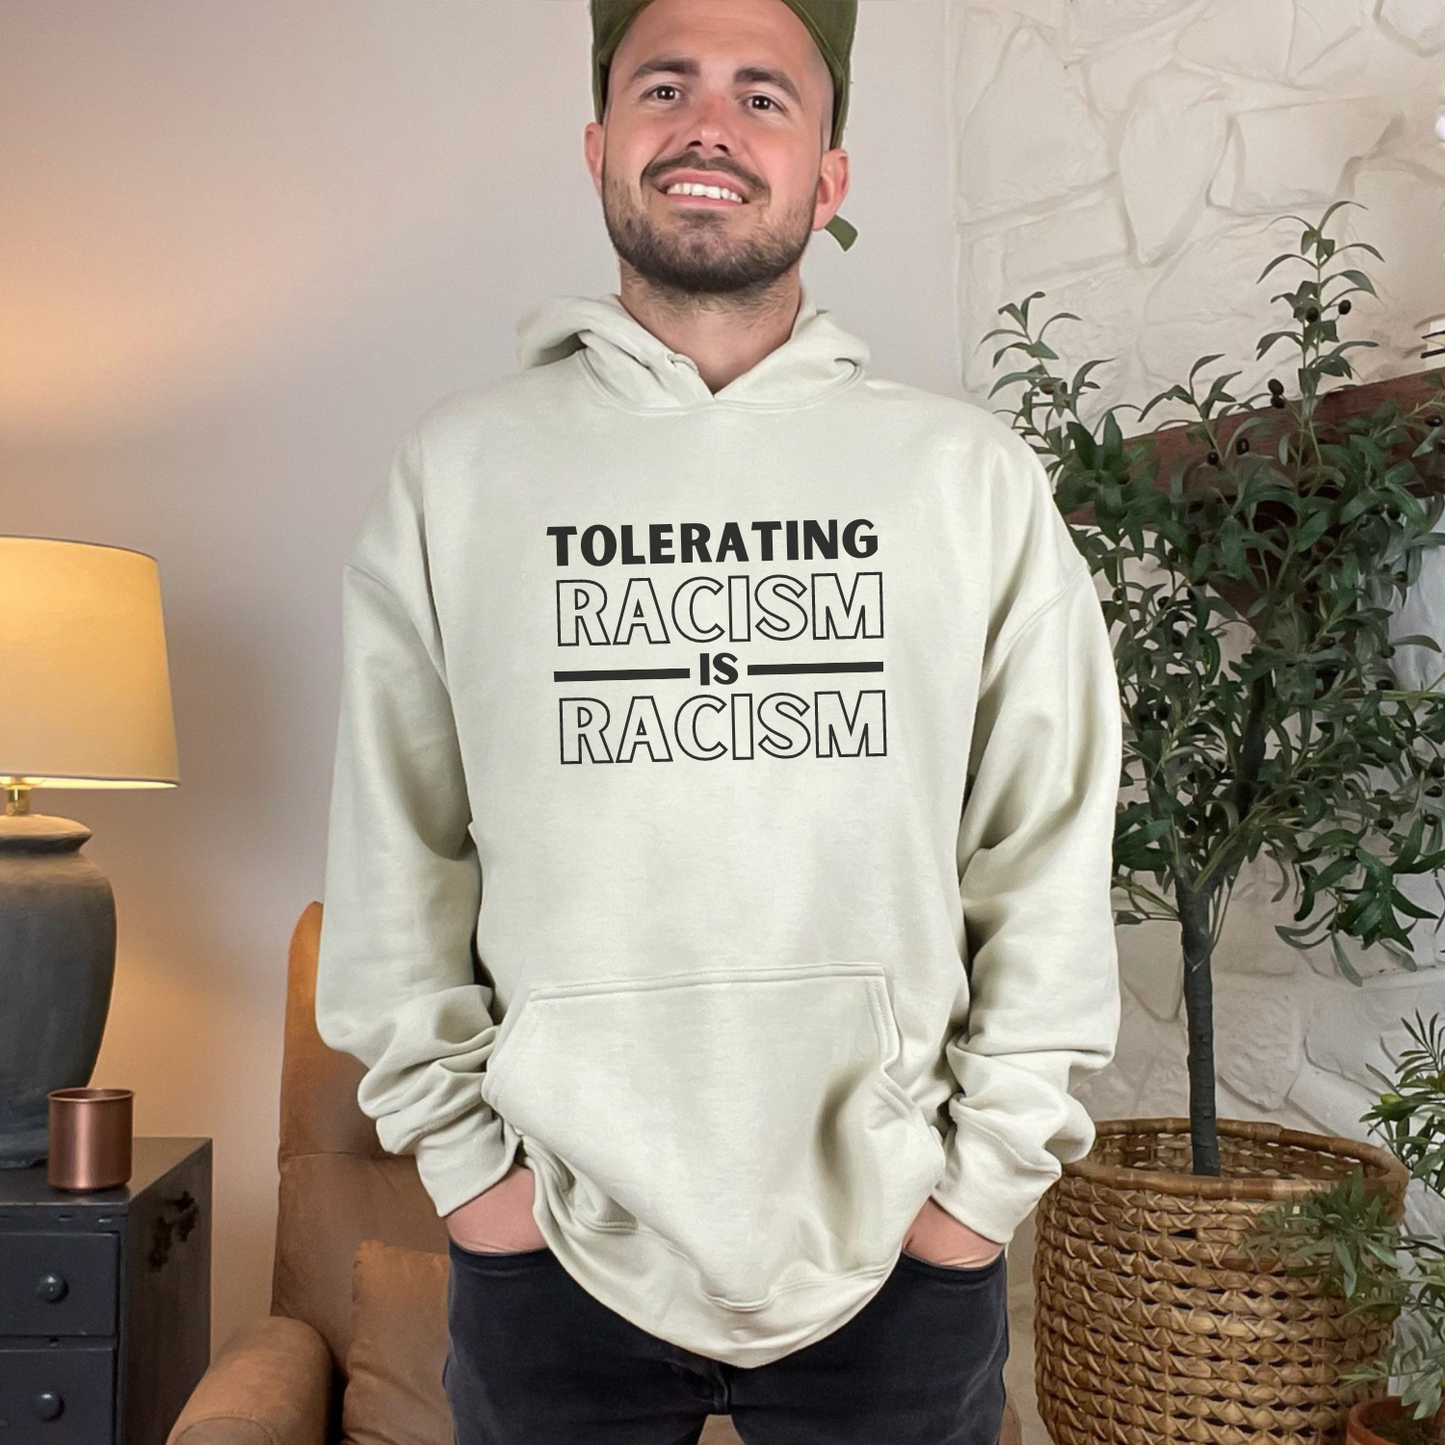 Gildan 18500 hoodie sweatshirt that has a clear and powerful message against racism. "Tolerating Racism Is Racism" - color sand with black design.